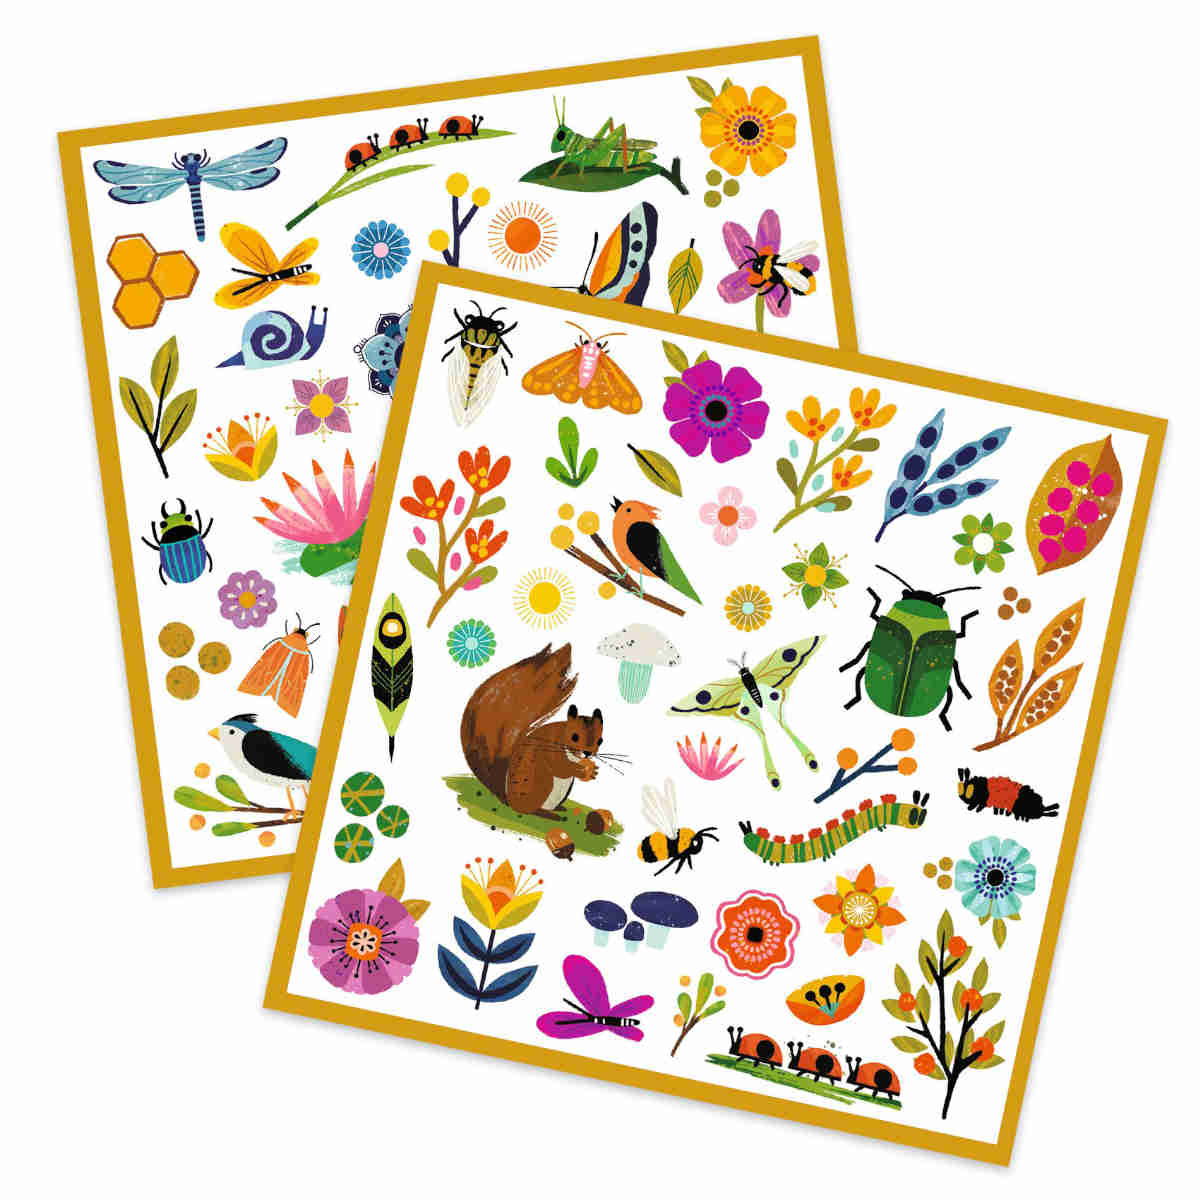 Front view of the garden sticker pack.